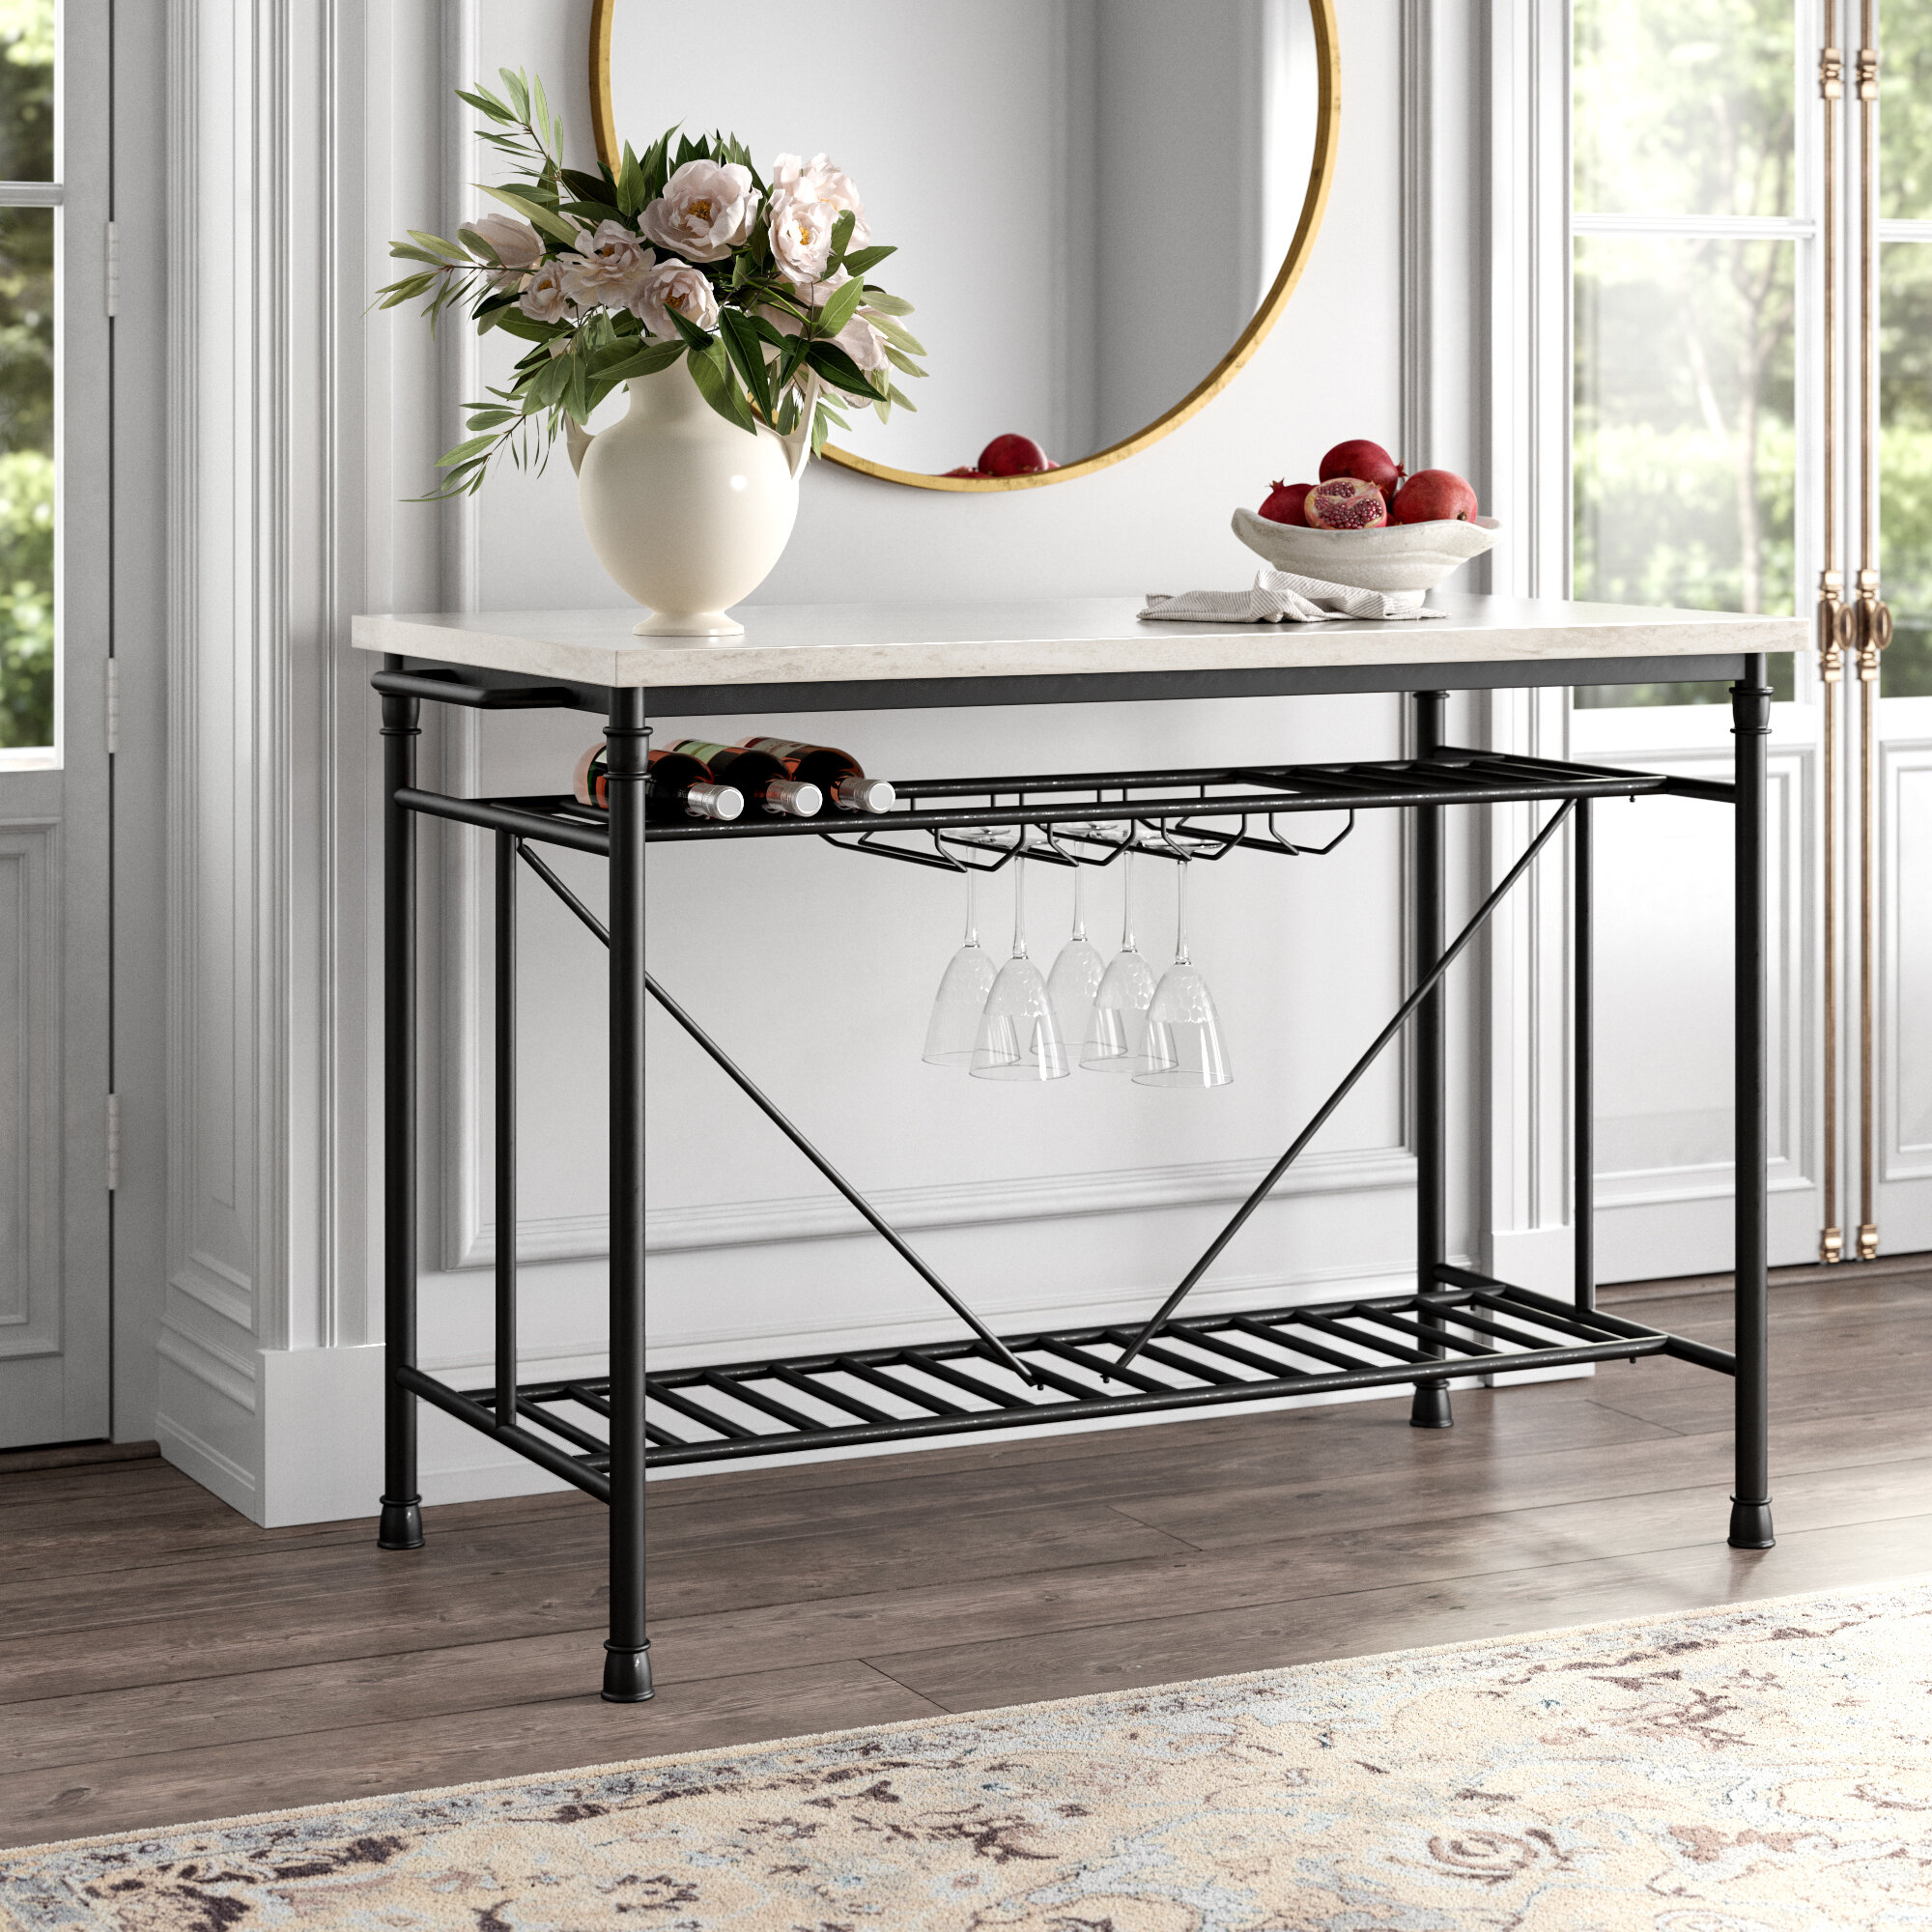 Kelly Clarkson Home Moran Kitchen Island With Marble Top Reviews